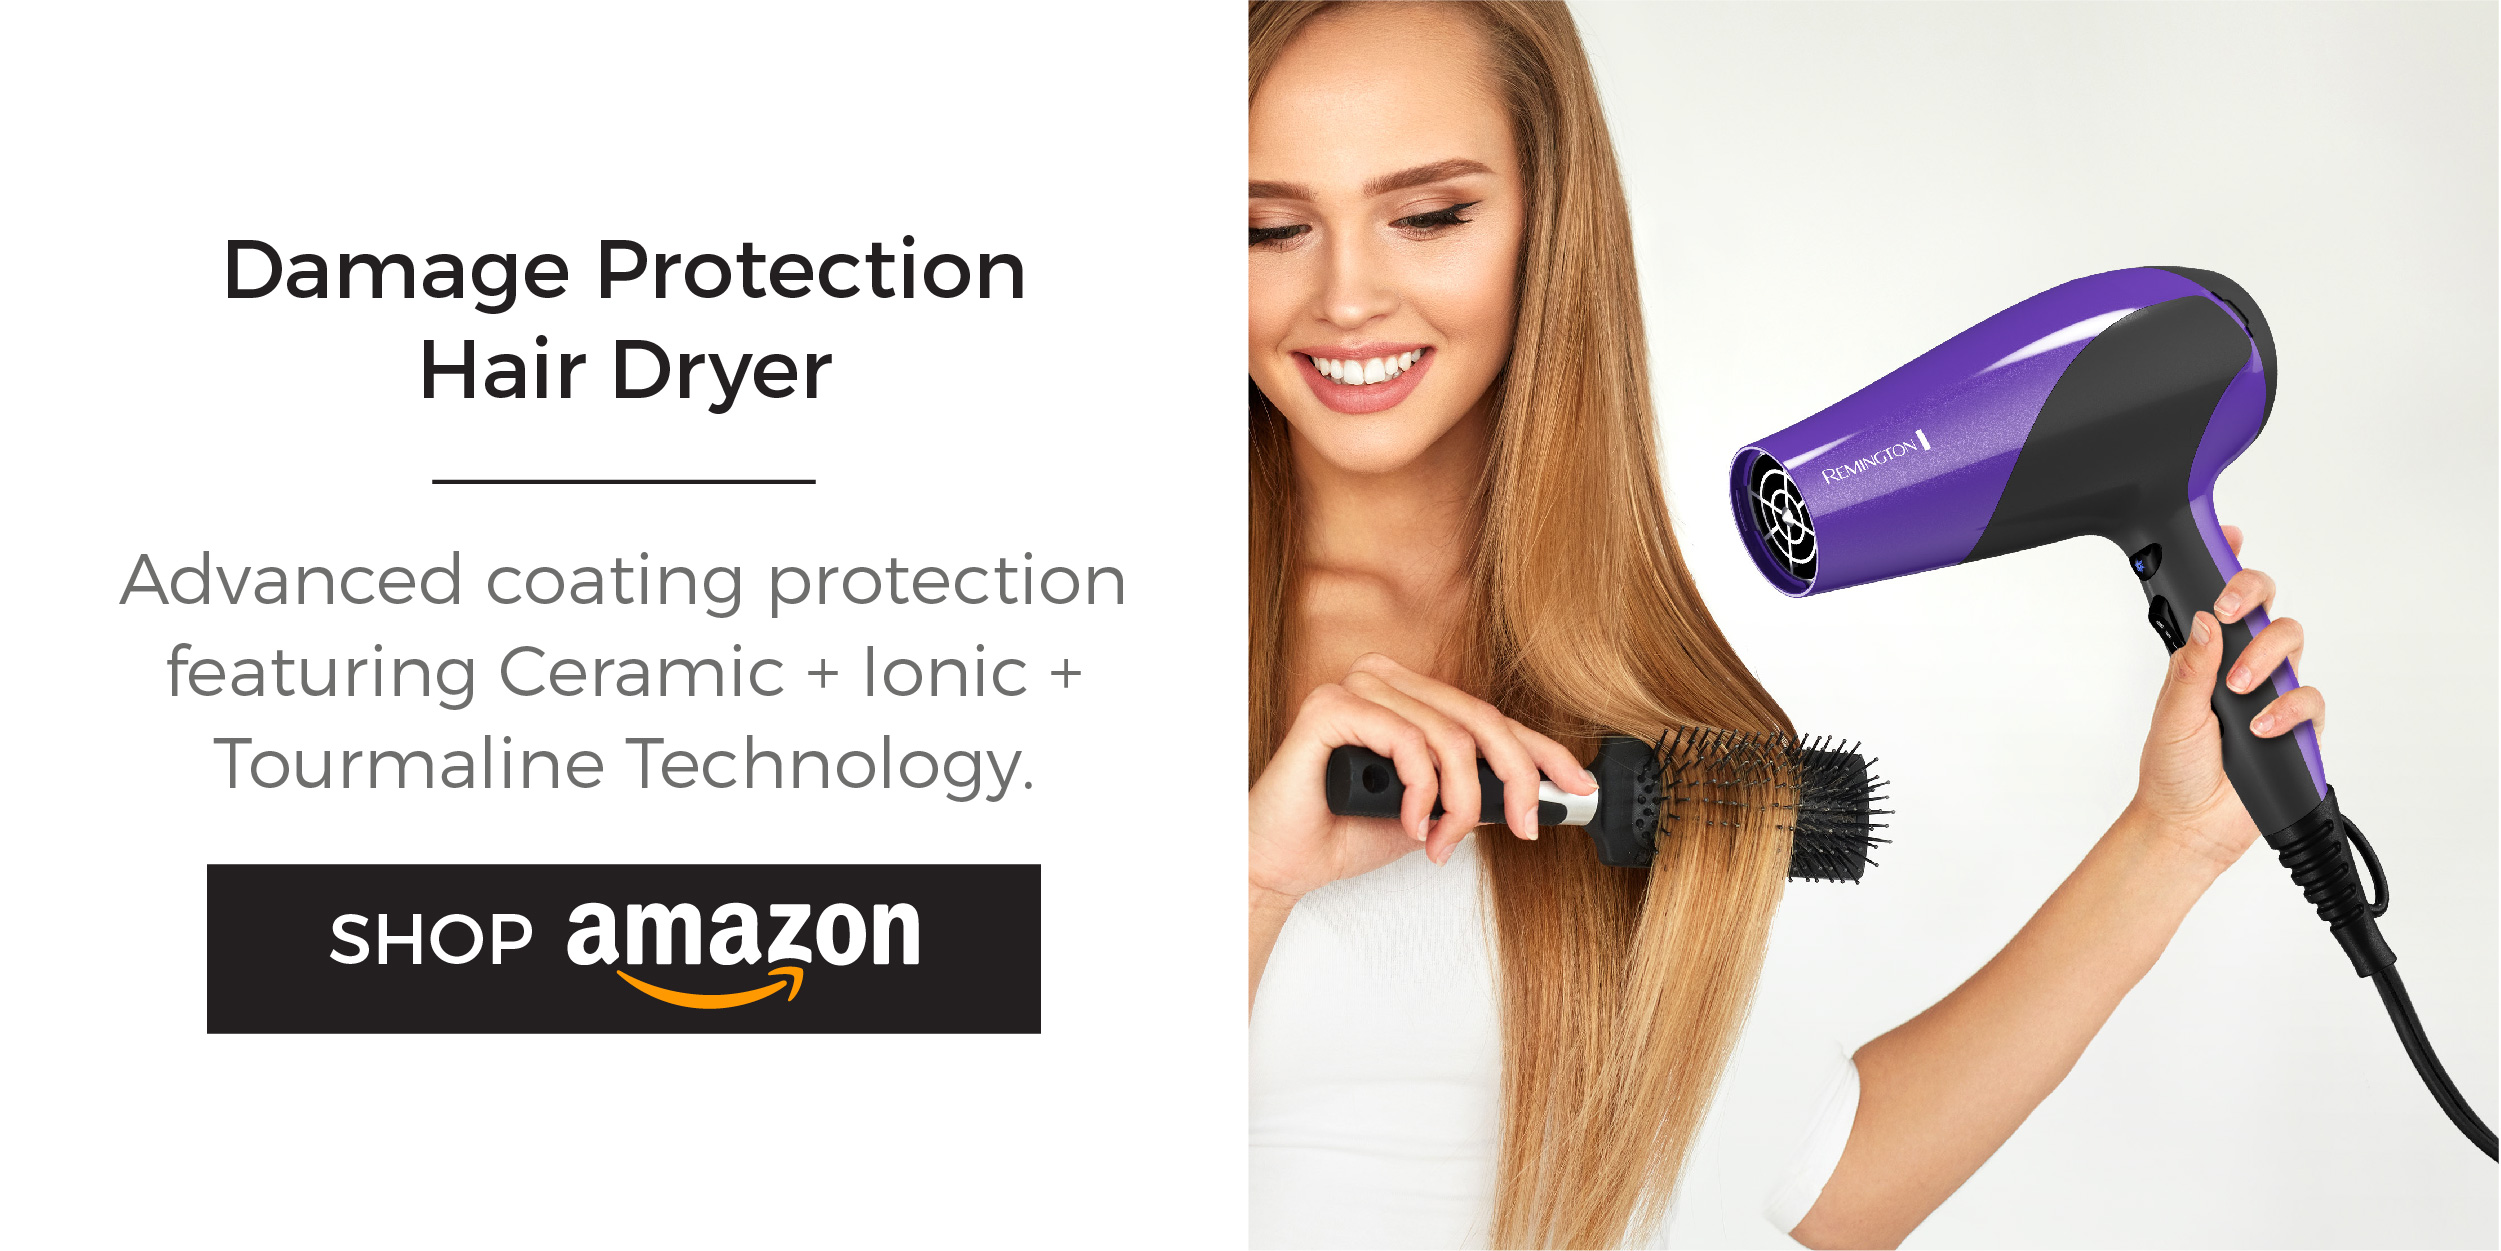 Damage Protection Hair Dryer. Shop now!